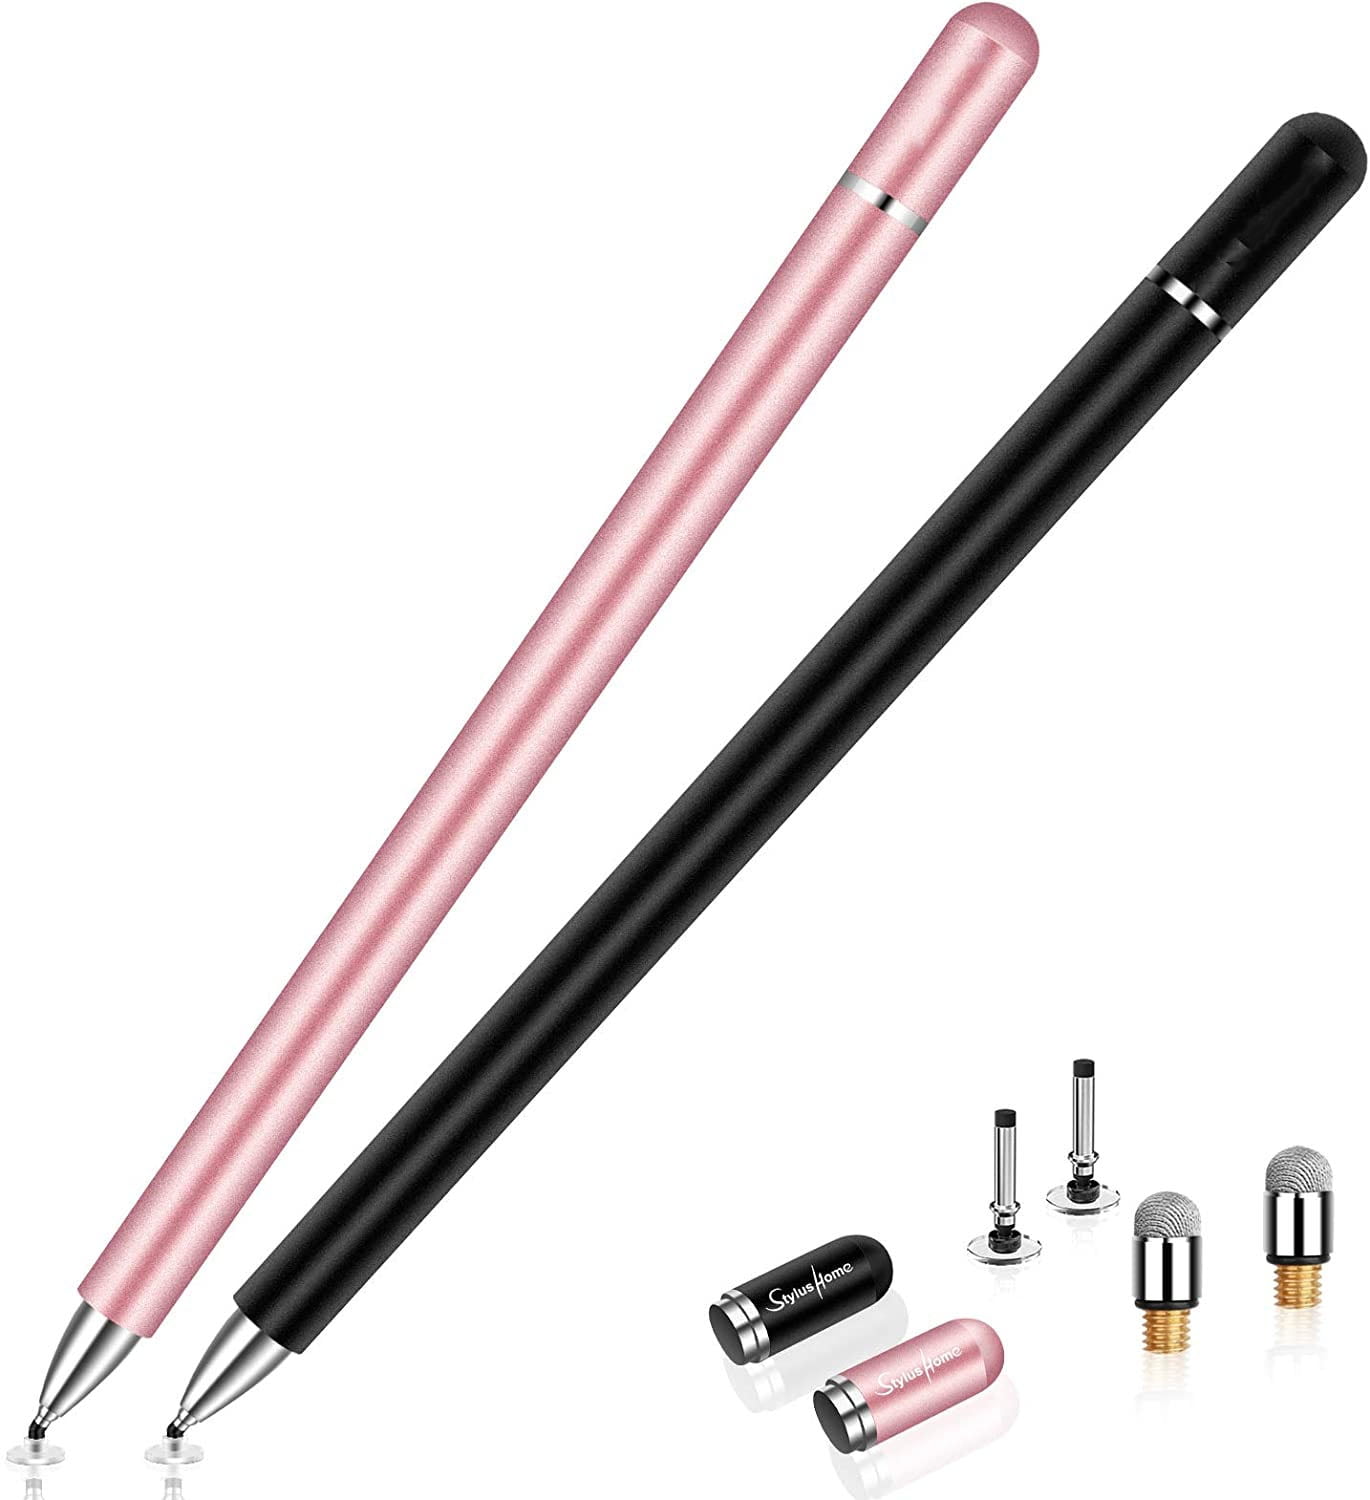 2x Pink Stylus Touch Pen for Amazon Kindle Galaxy Tablet PC Touch iPhone 